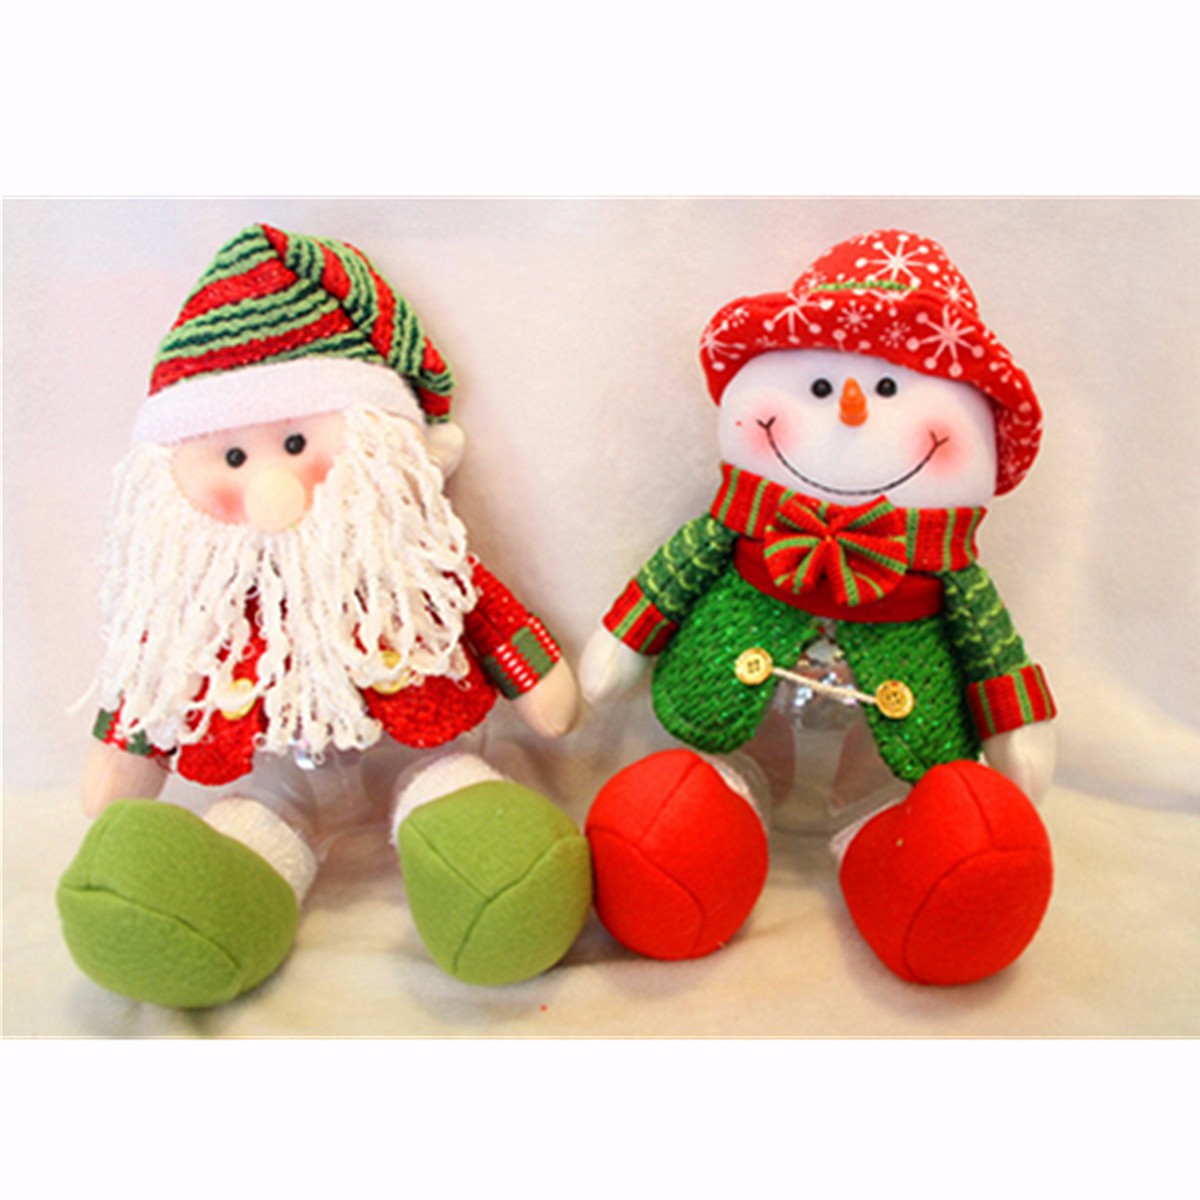 Lovely Snowman Santa Claus Candy Round Jar Bottle Christmas Kid Toy Doll Gift Decor - Photo: 2